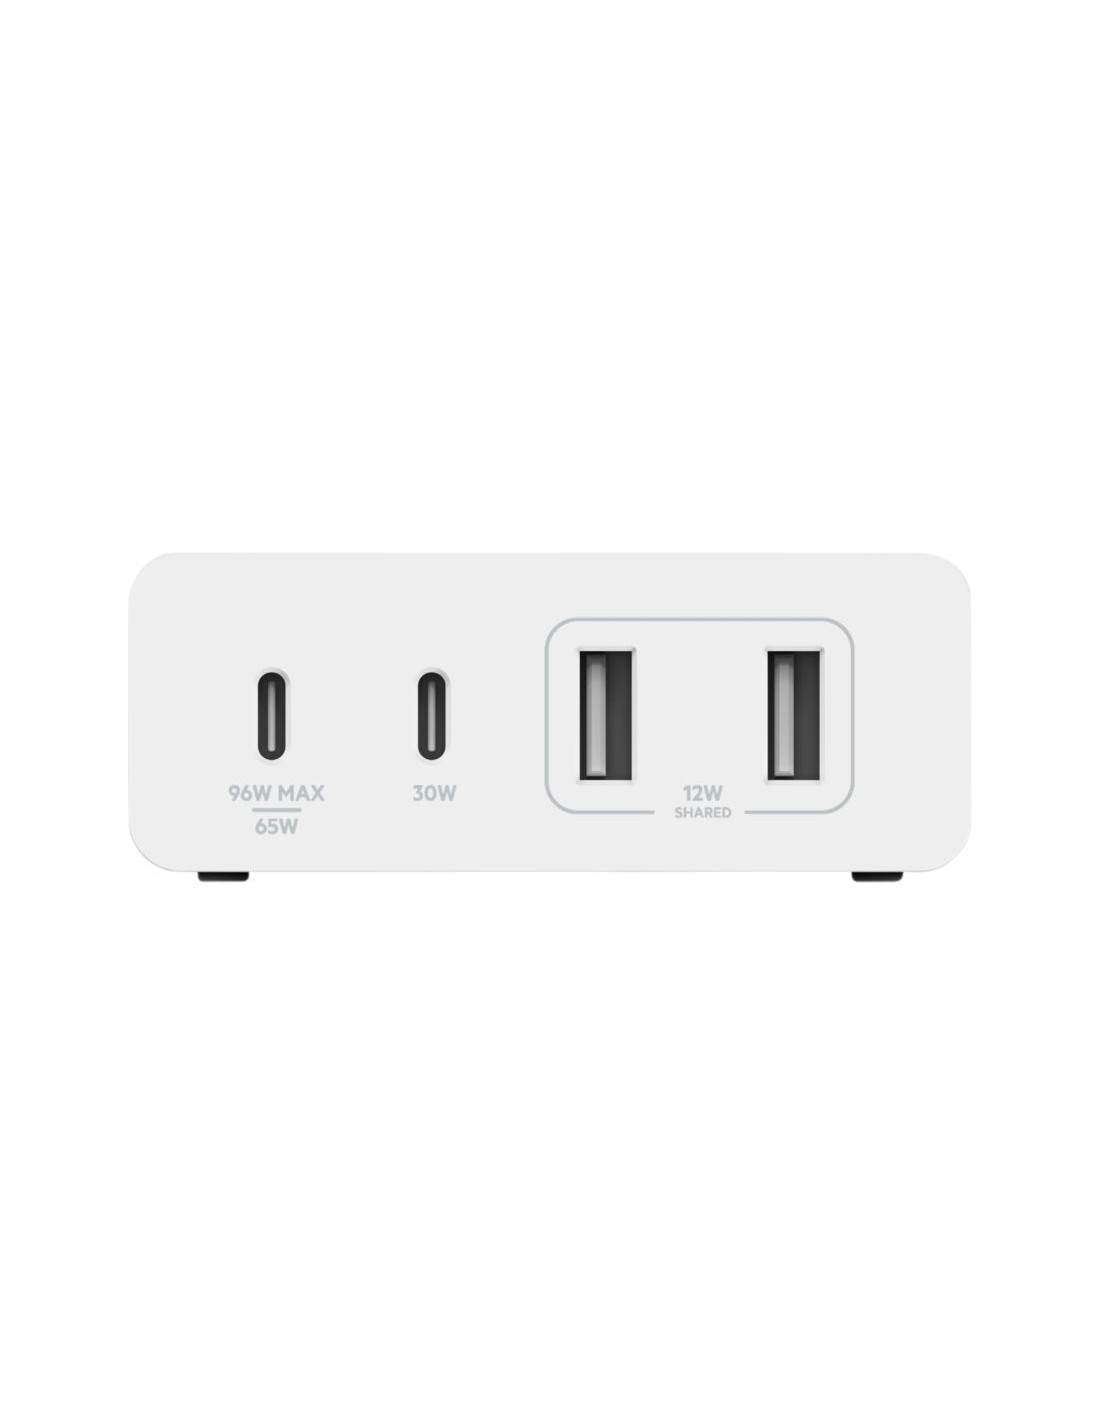 Chargeur GaN 4 ports BOOST↑CHARGE Pro 108 W - Apple (FR)